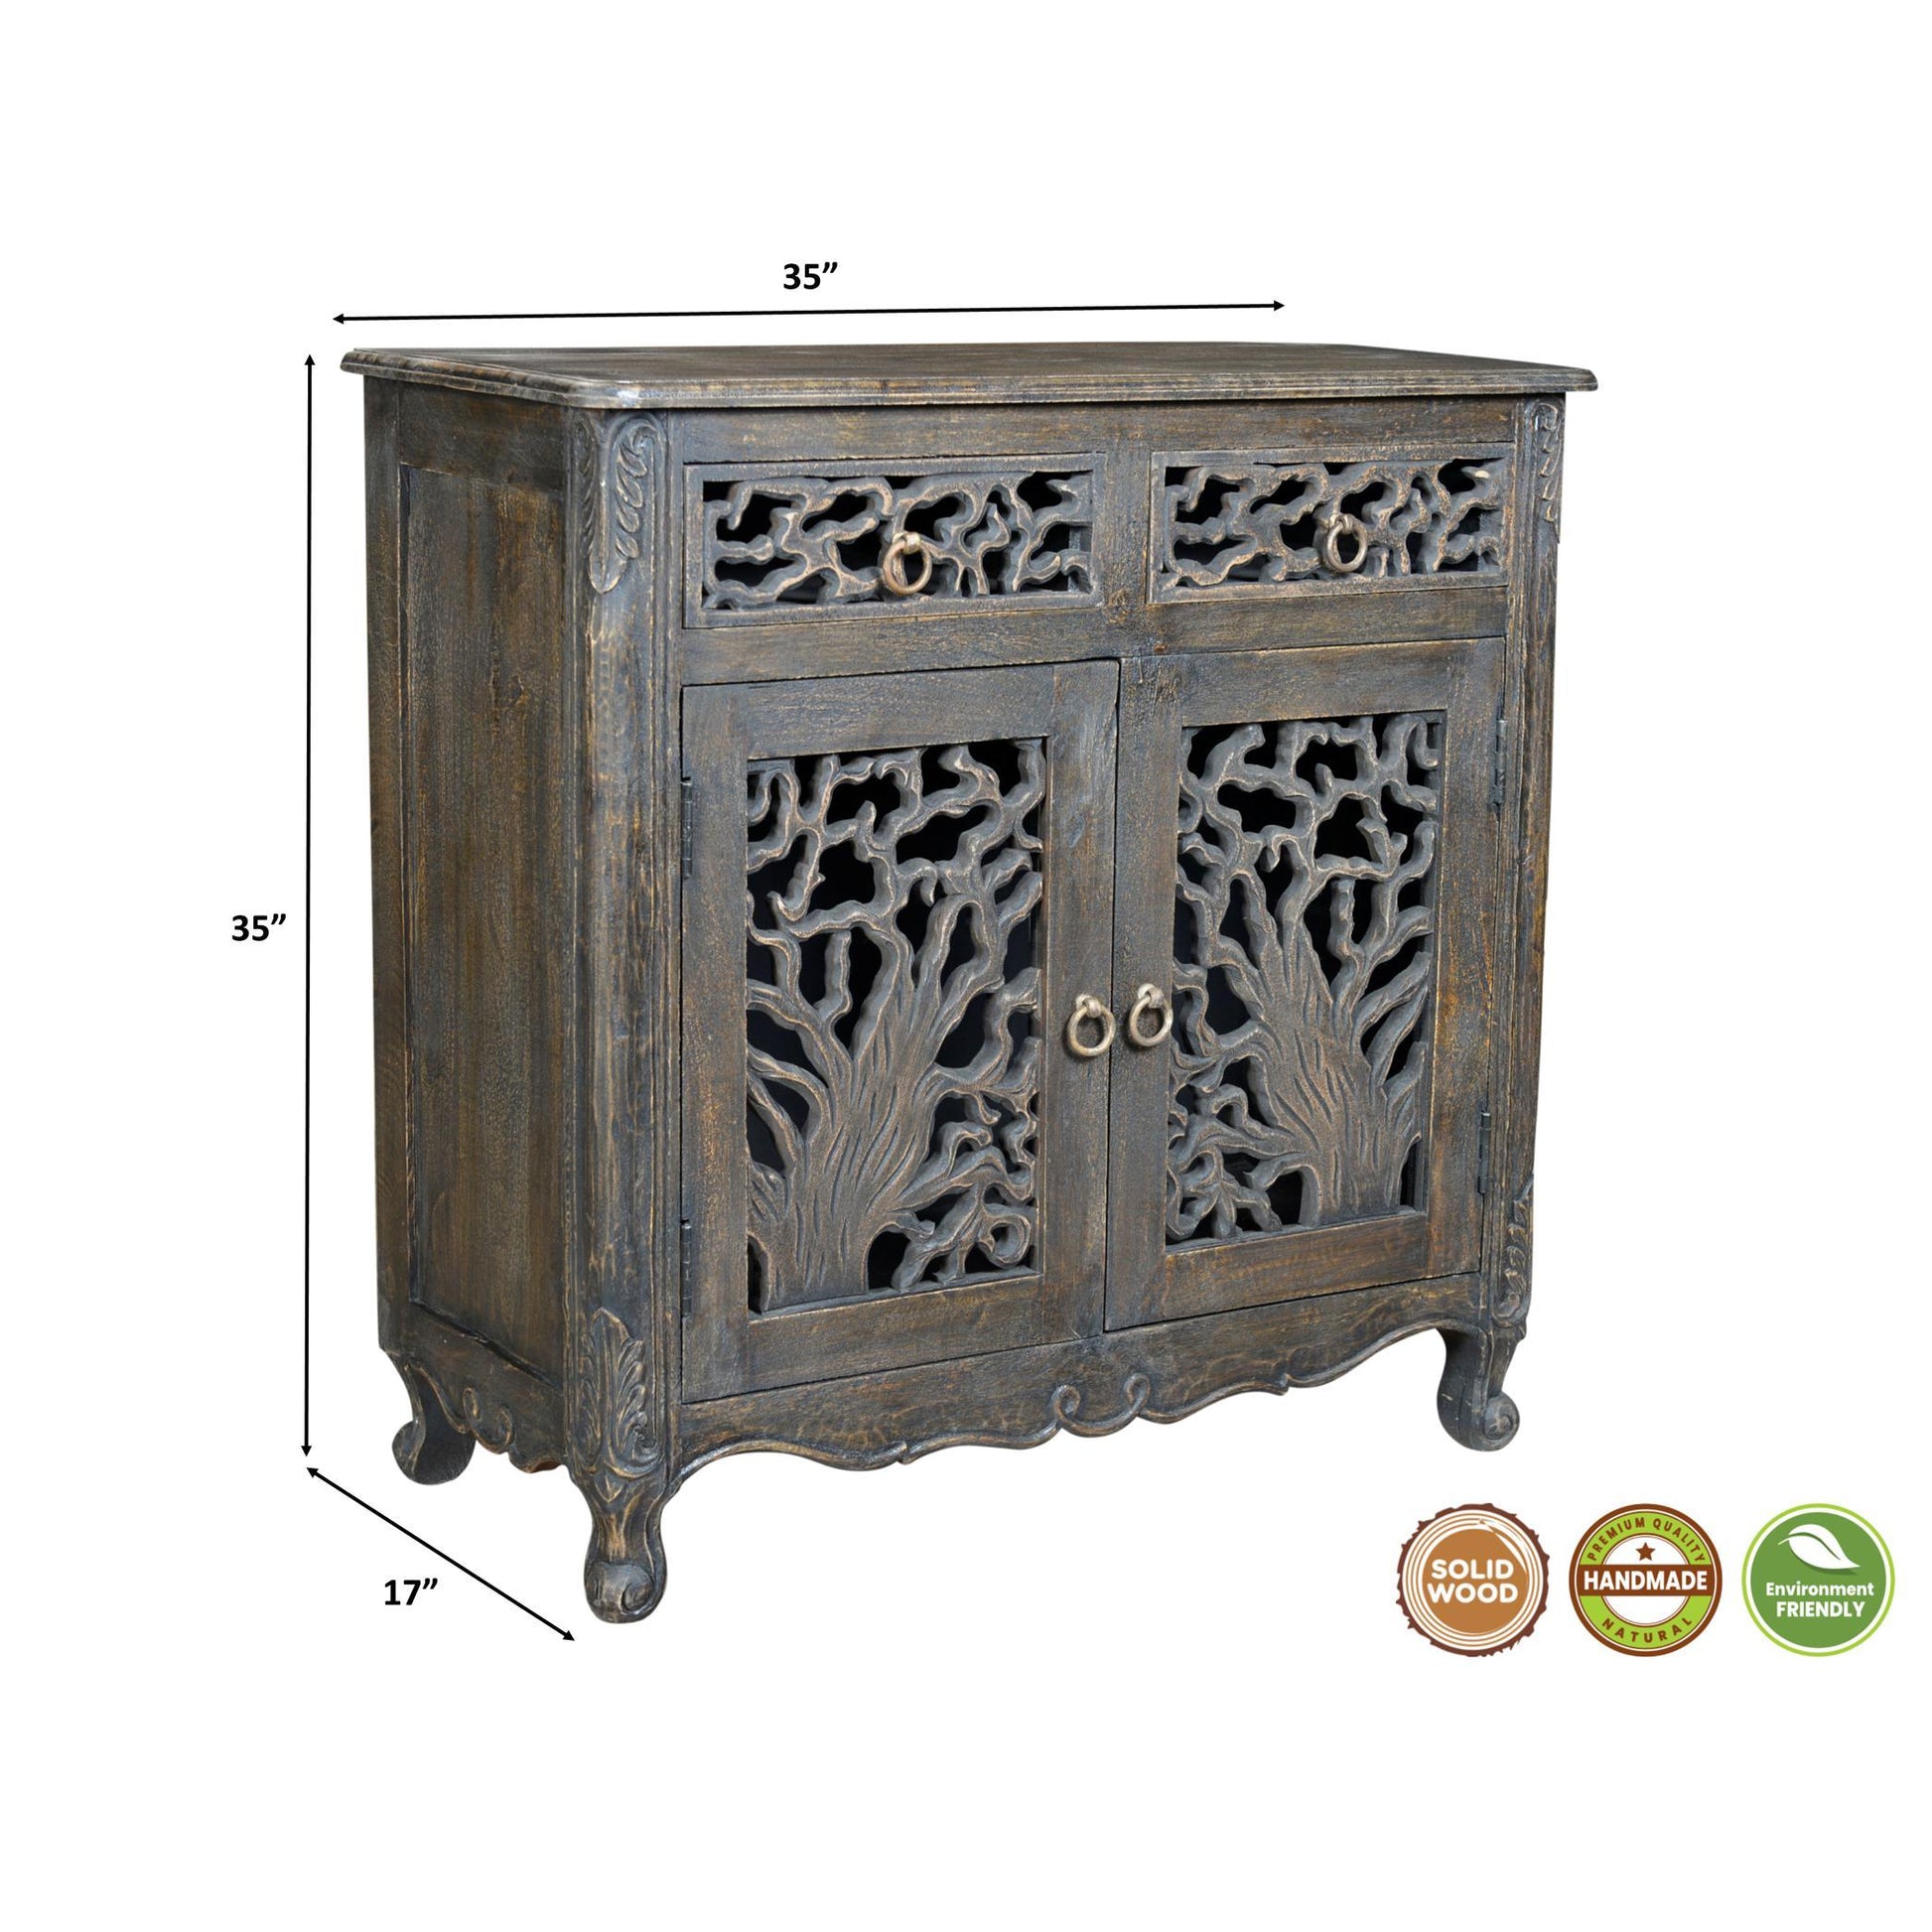 Lawrence 35 inches Black Carved Storage Cabinet - Sideboards and Things Brand_LOOMLAN Home, Color_Black, Color_Brown, Features_Carved Doors, Features_Handmade, Features_Handmade/Handcarved, Features_Repurposed Materials, Features_With Drawers, Finish_Distressed, Height_30-40, Hinges, Materials_Reclaimed Wood, Width_30-40